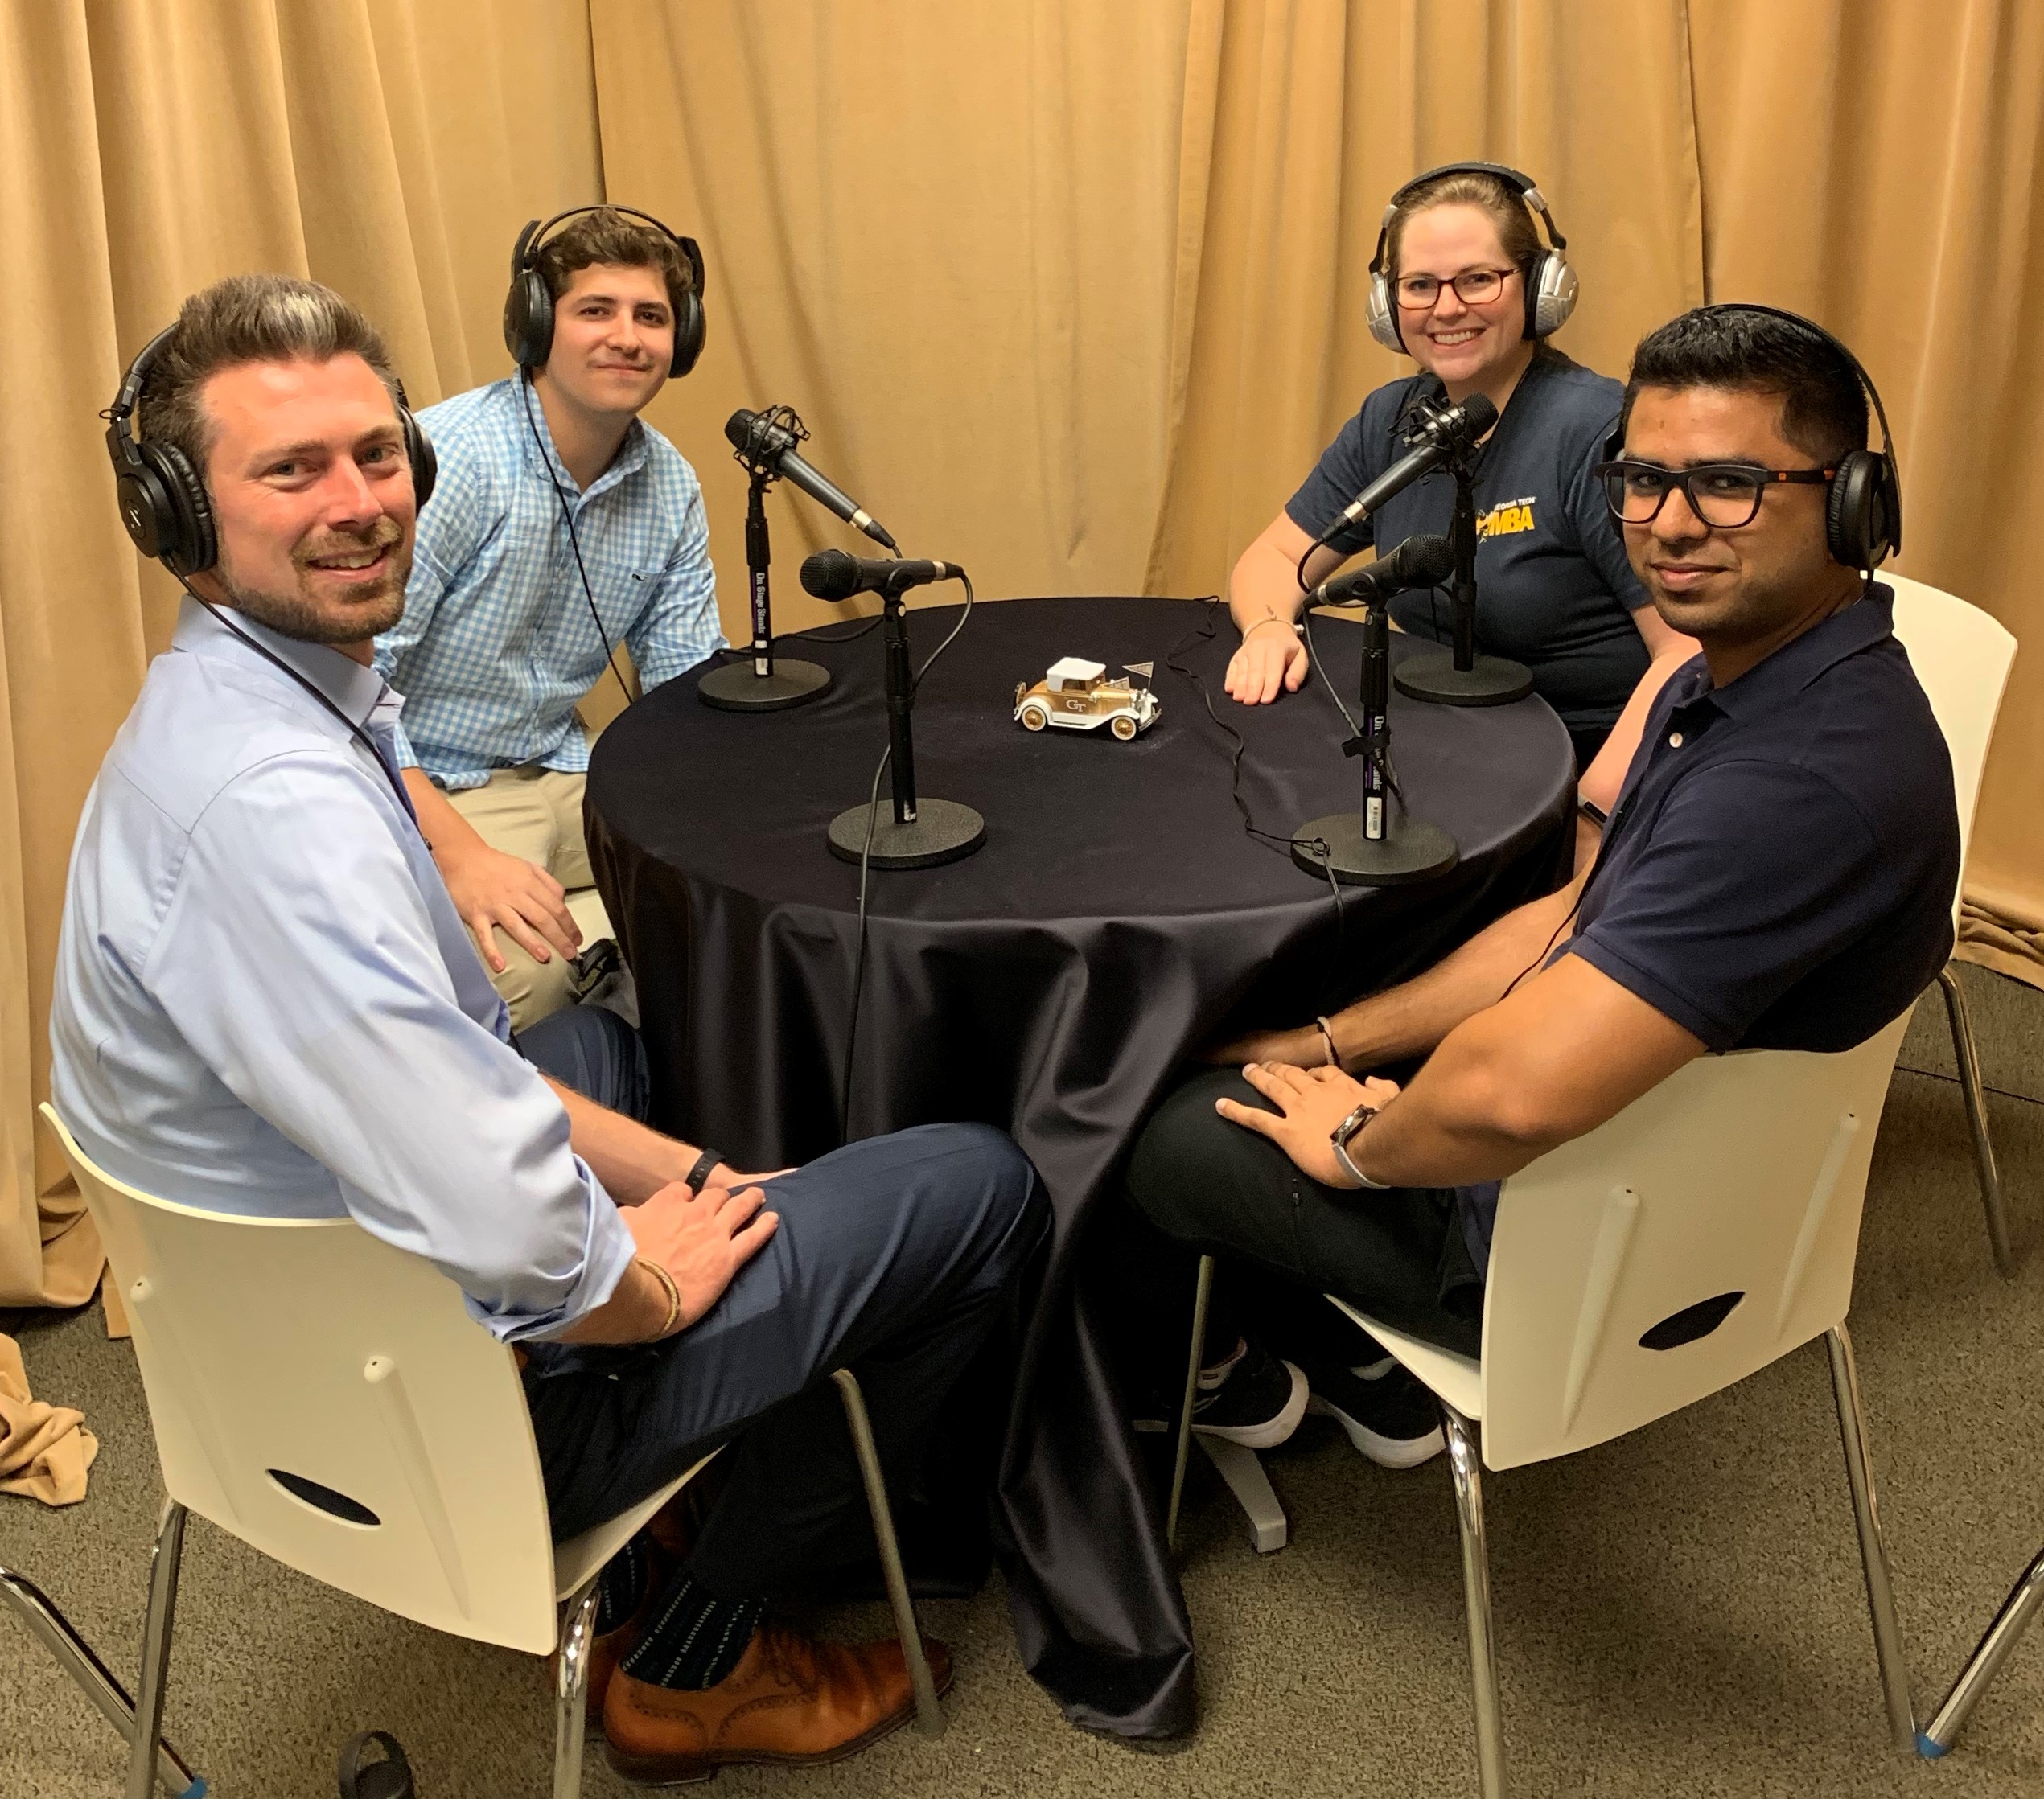 Alex Lafley, Andres Bequillard, host Jasmine Howard, and Parv Aggarwal join us on this episode of The Intersection to talk about their summer internships in west coast tech.